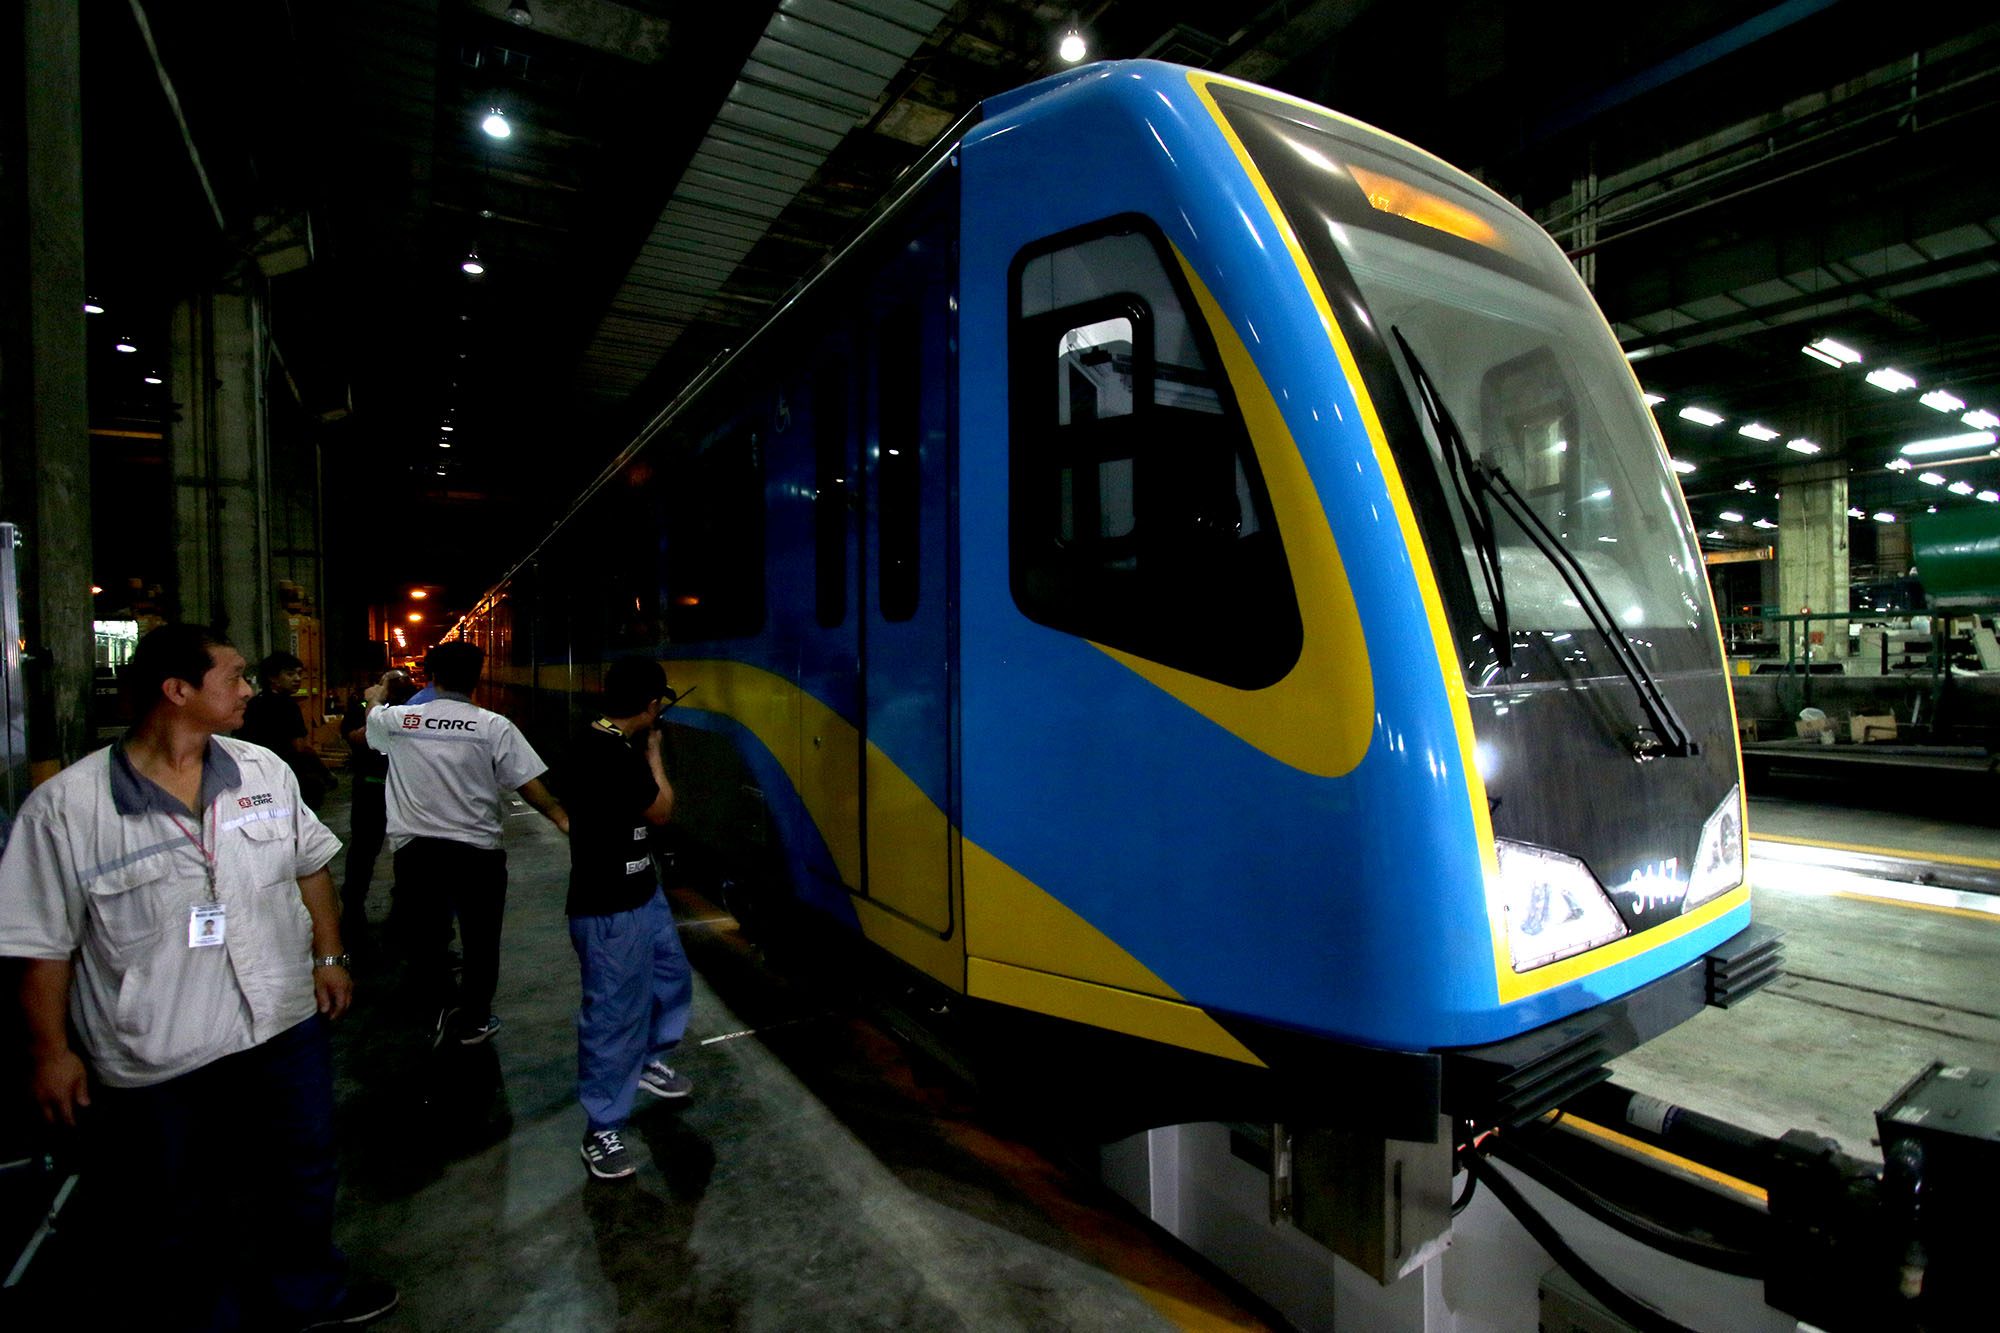 Chinese firm Dalian agrees to pay all costs to fix unused MRT3 trains